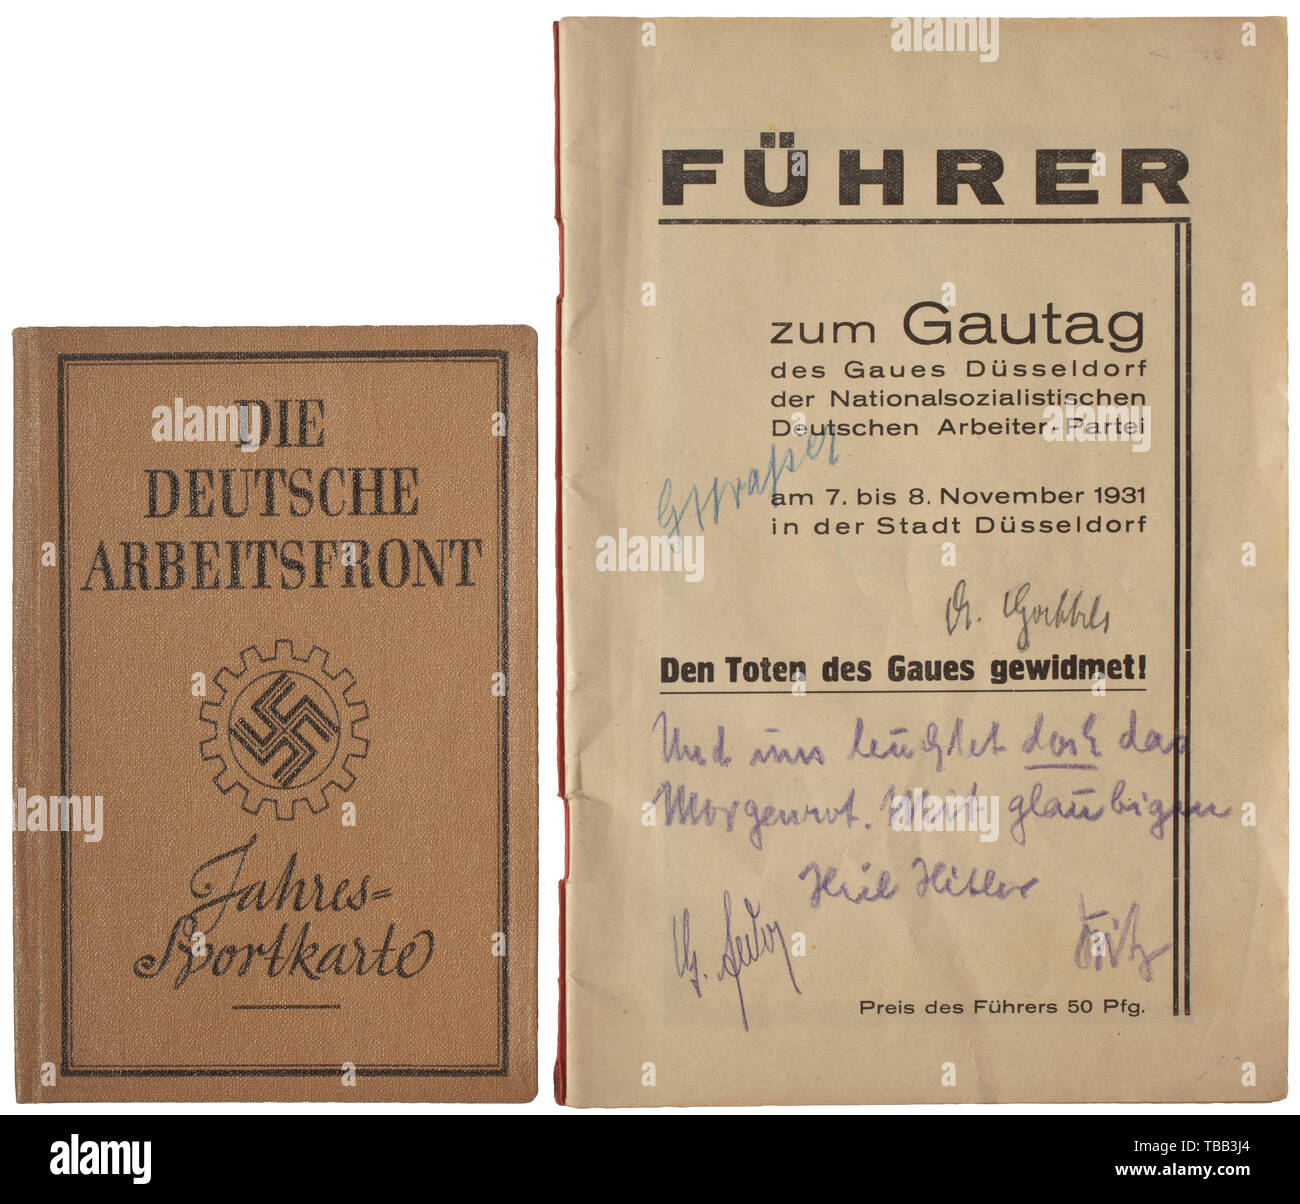 Friedrich-Karl Florian - a guide for the Gau Day in Düsseldorf 1931 with signatures of Goebbels, Feder and Strasser On the envelope the original signatures of Joseph Goebbels, Gregor Strasser and Gottfried Feder (party theoretician of the NSDAP) with quote (tr.) 'And yet, the sun rises upon us. With a faithful Heil Hitler'. With an annual sports pass of the DAF for Florian, with original signature and glued passport photo (in Gauleiter uniform). historic, historical, 20th century, 1930s, NS, National Socialism, Nazism, Third Reich, German Reich, Germany, German, National So, Editorial-Use-Only Stock Photo